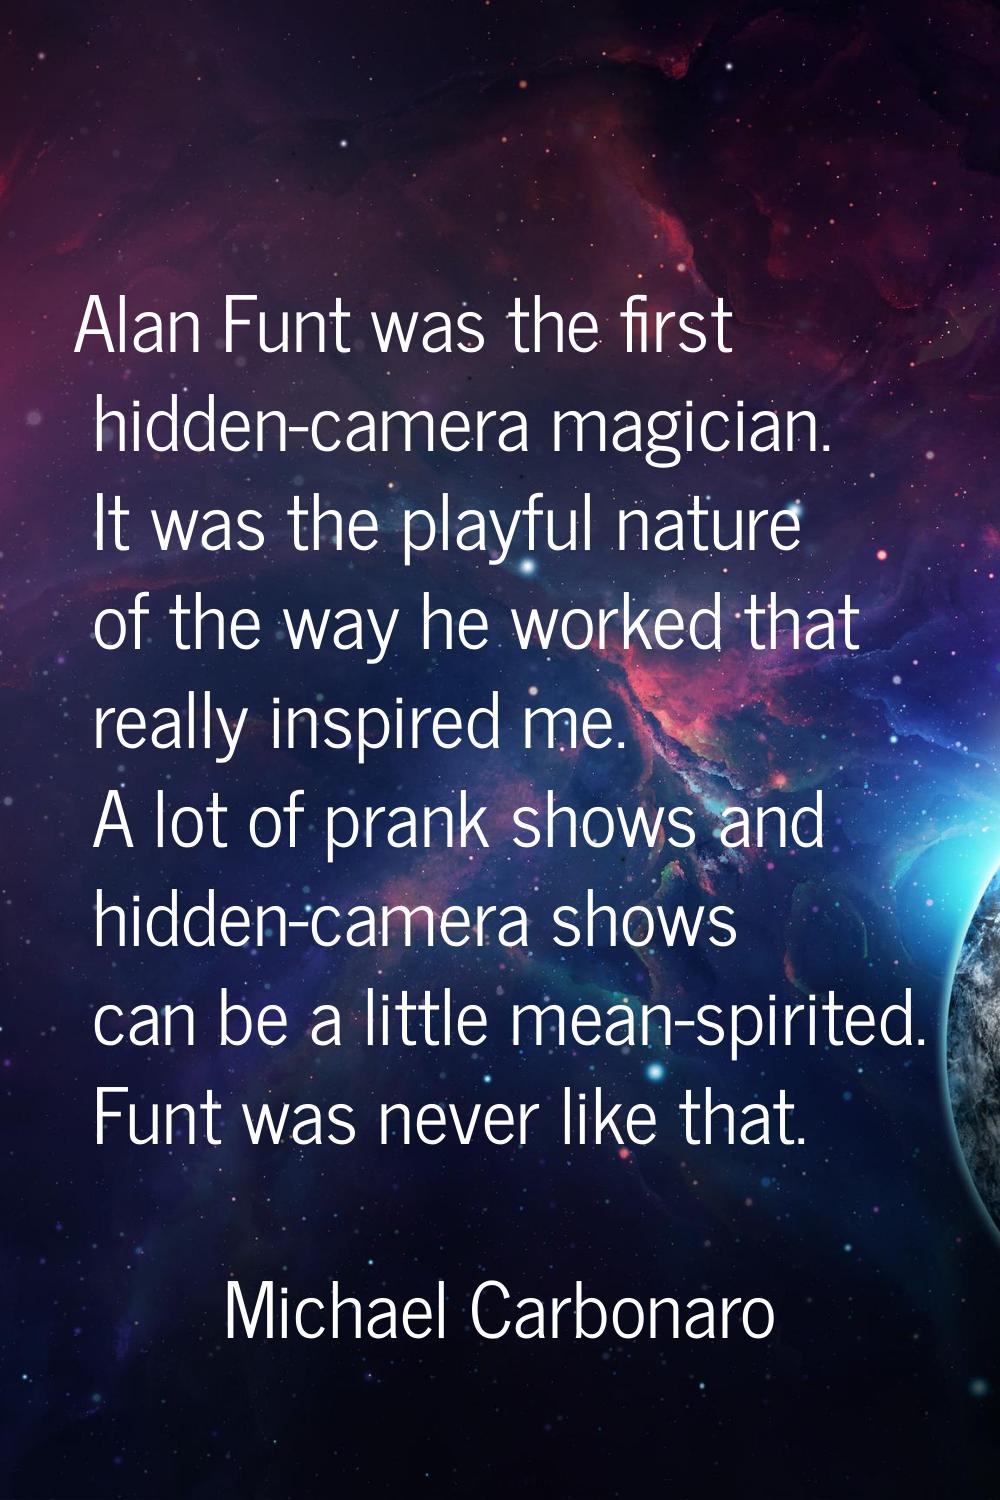 Alan Funt was the first hidden-camera magician. It was the playful nature of the way he worked that